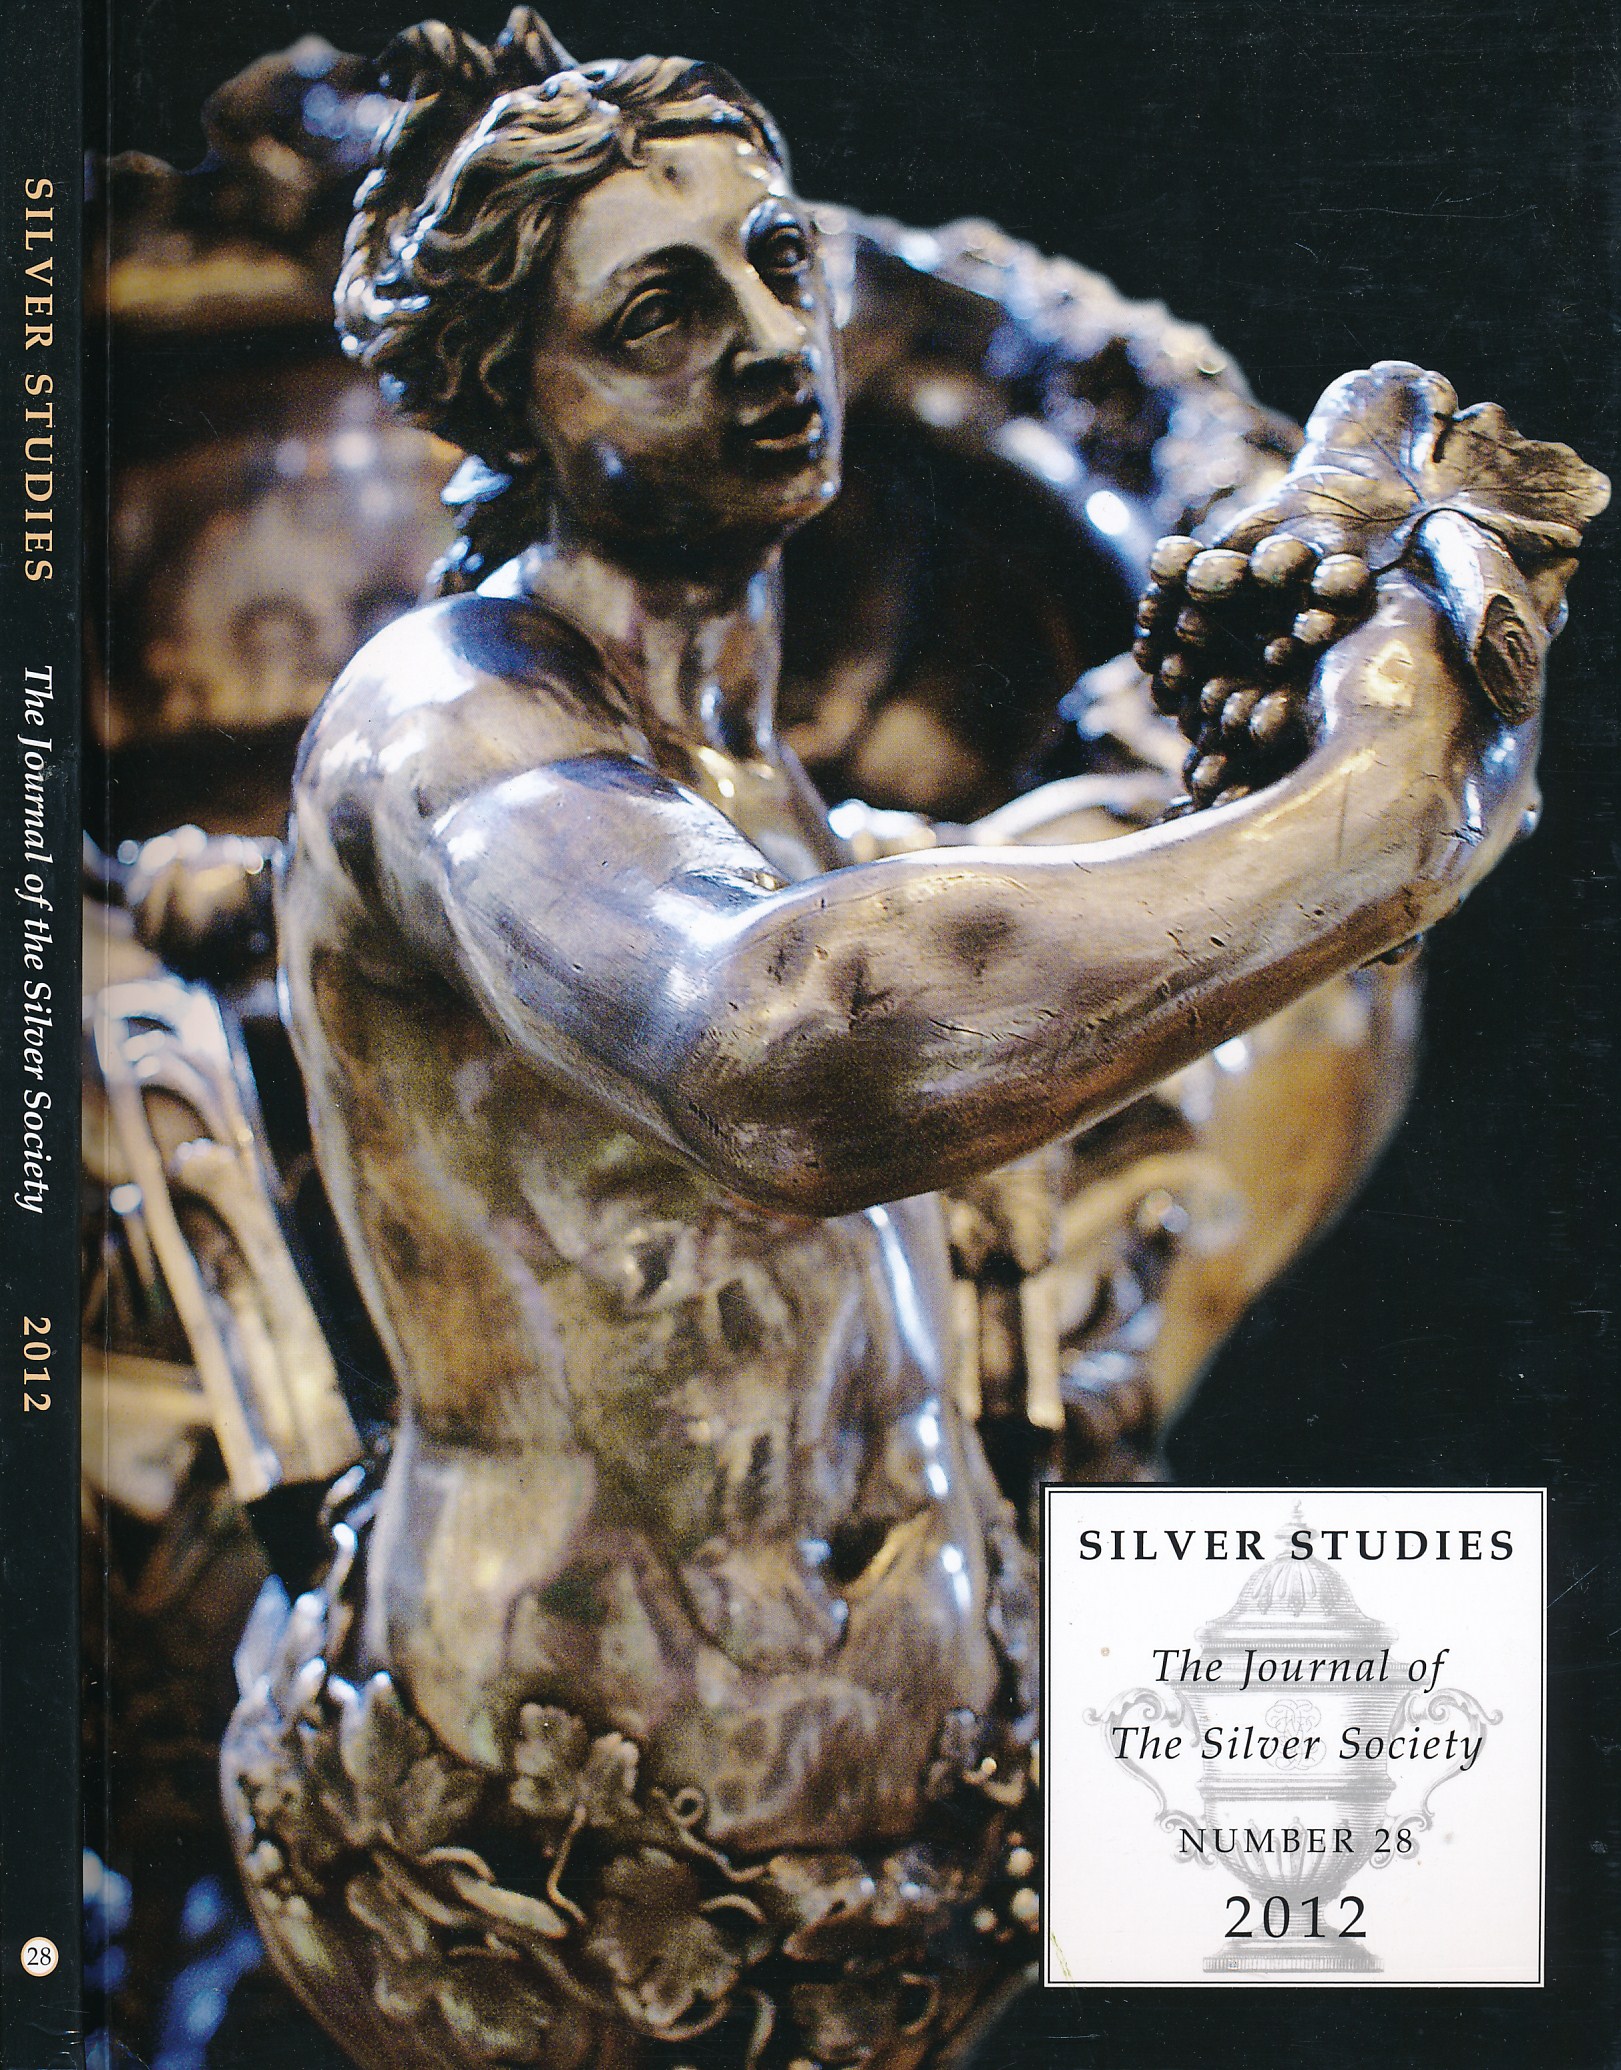 Silver Studies. The Journal of the Silver Society. Number 28. 2012